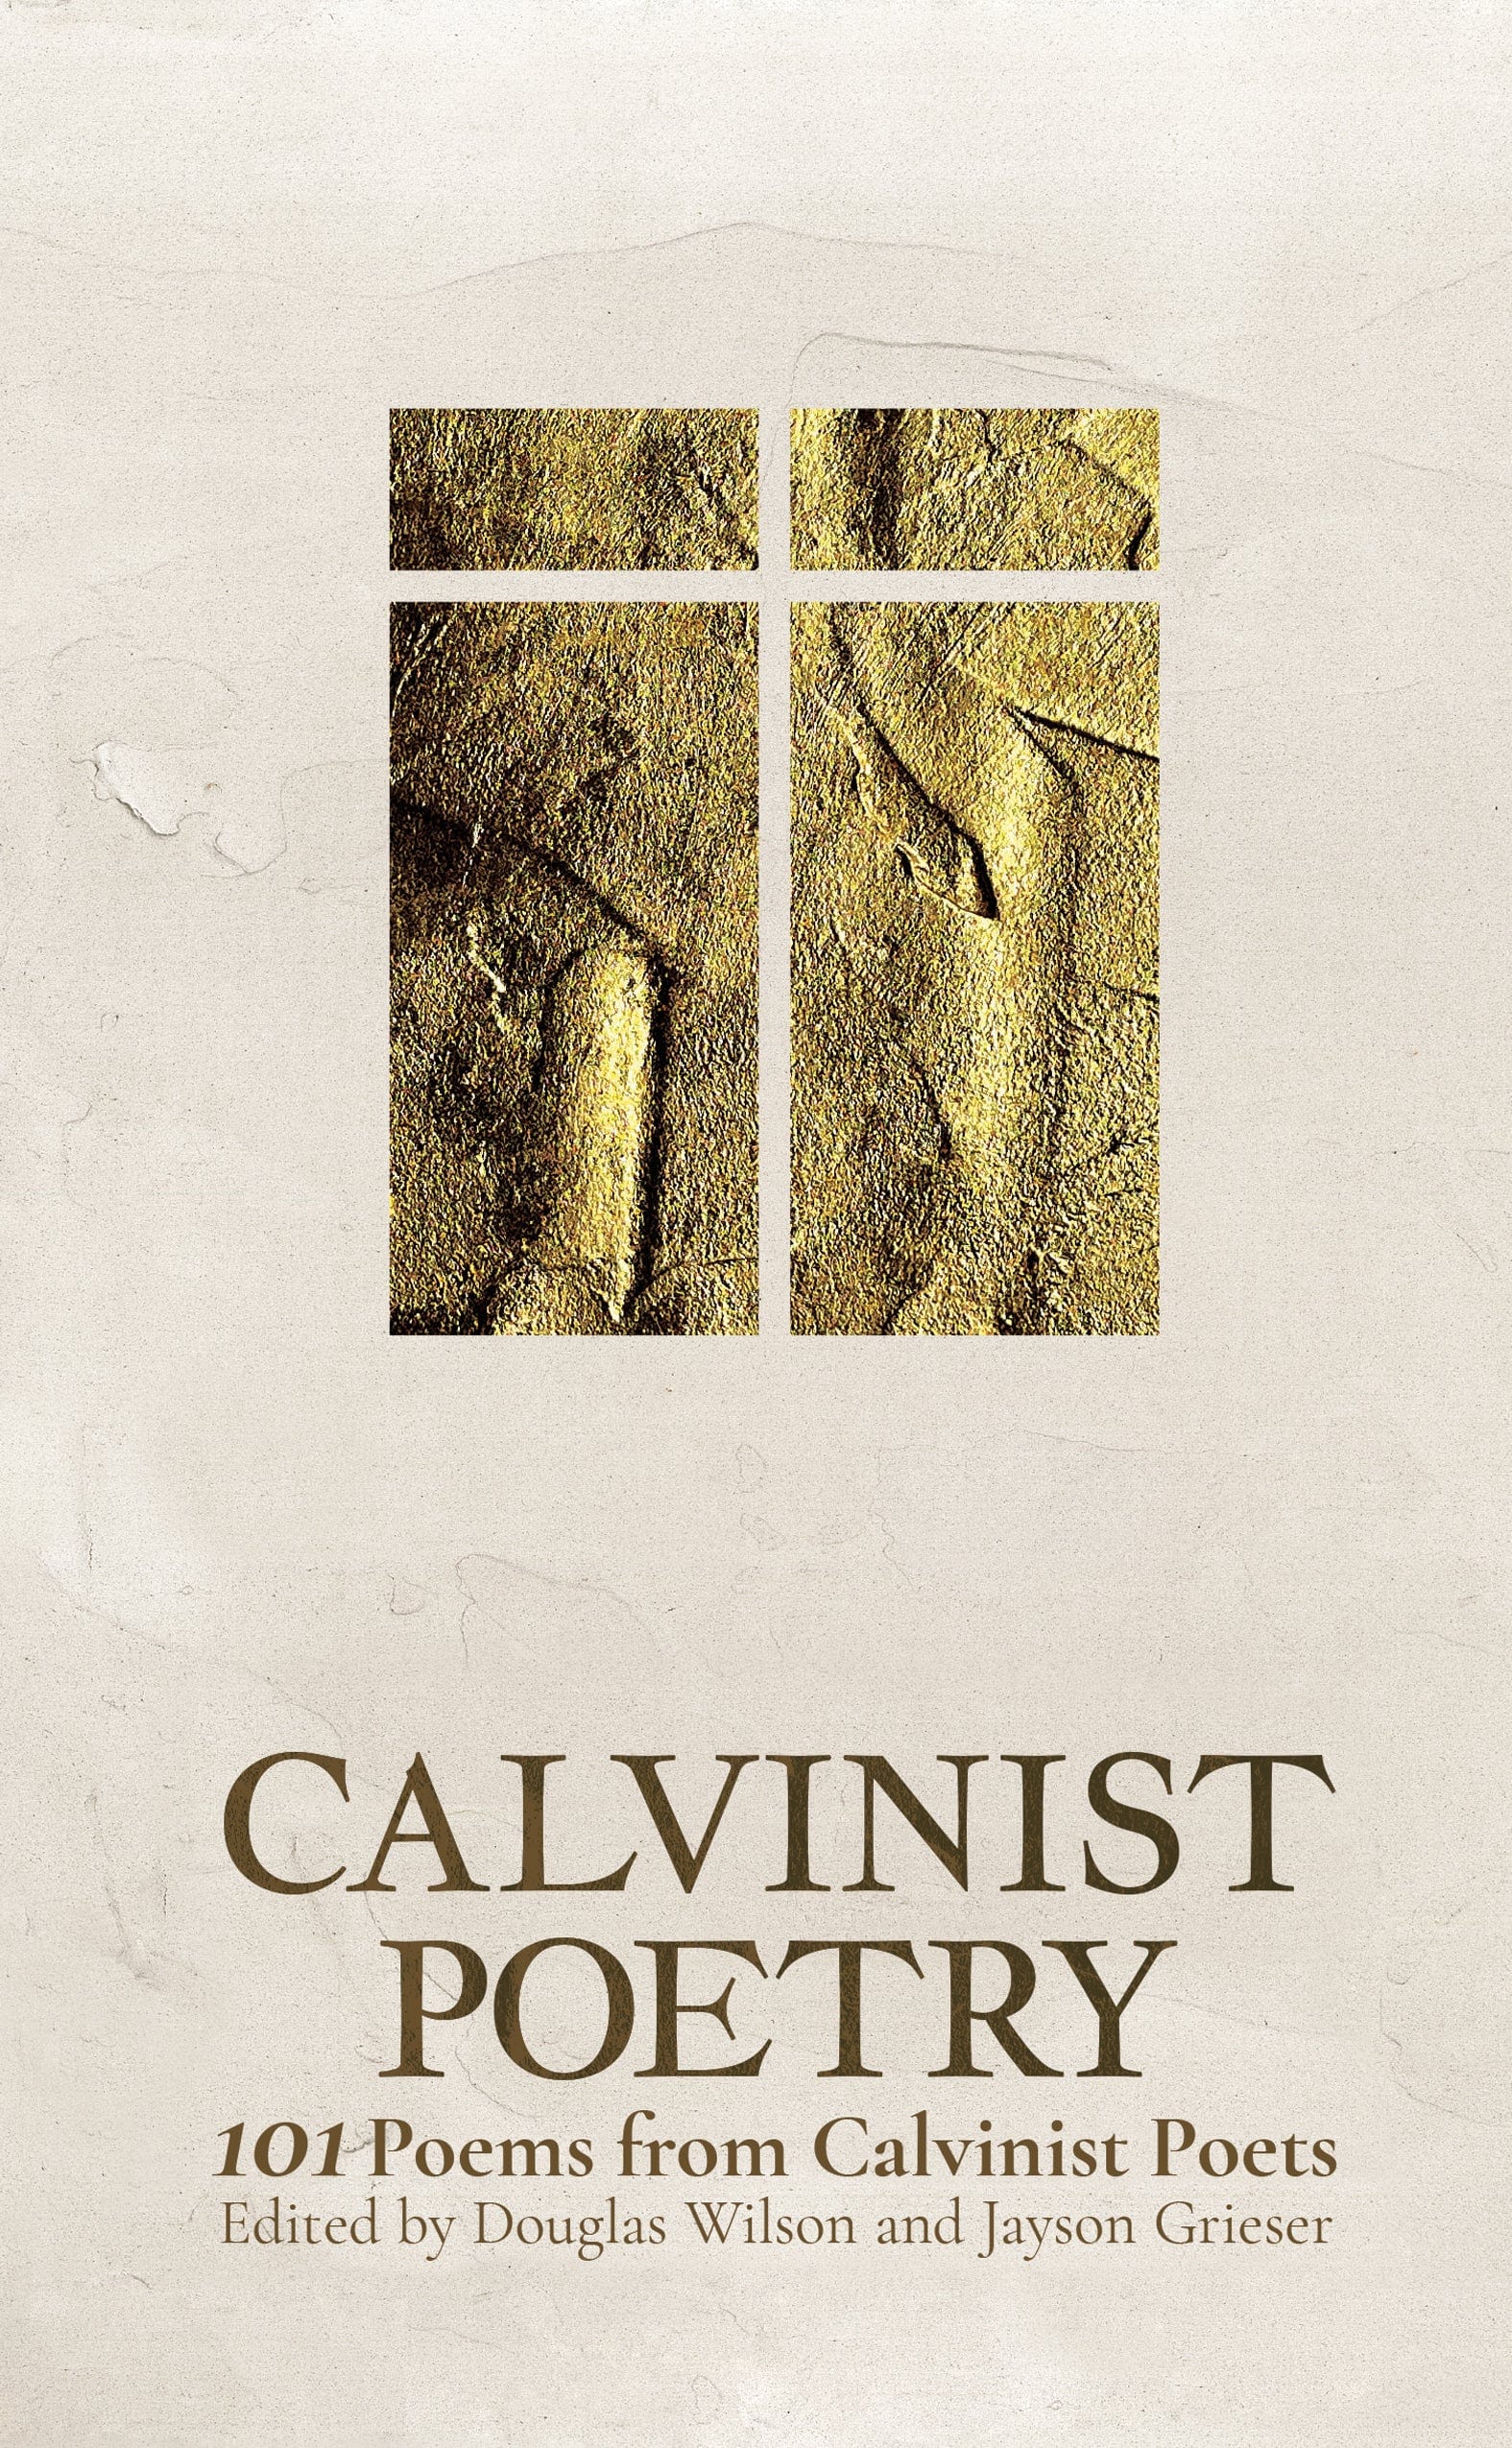 Calvinist Poetry: 101 Poems by Calvinist Poets